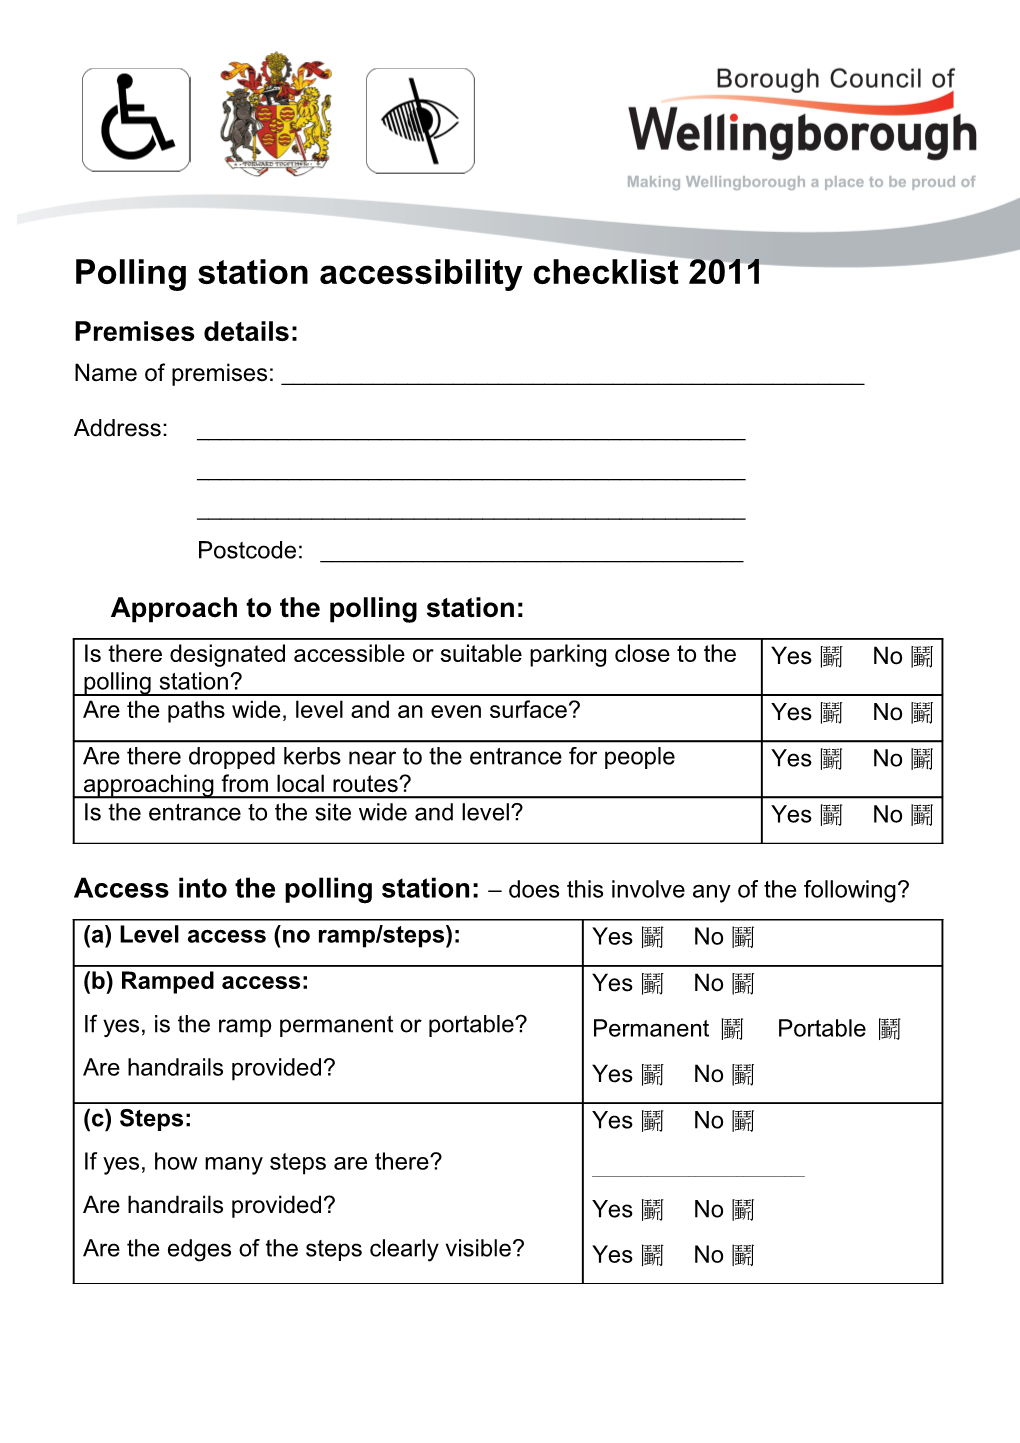 Polling Station Accessibility Checklist 2011